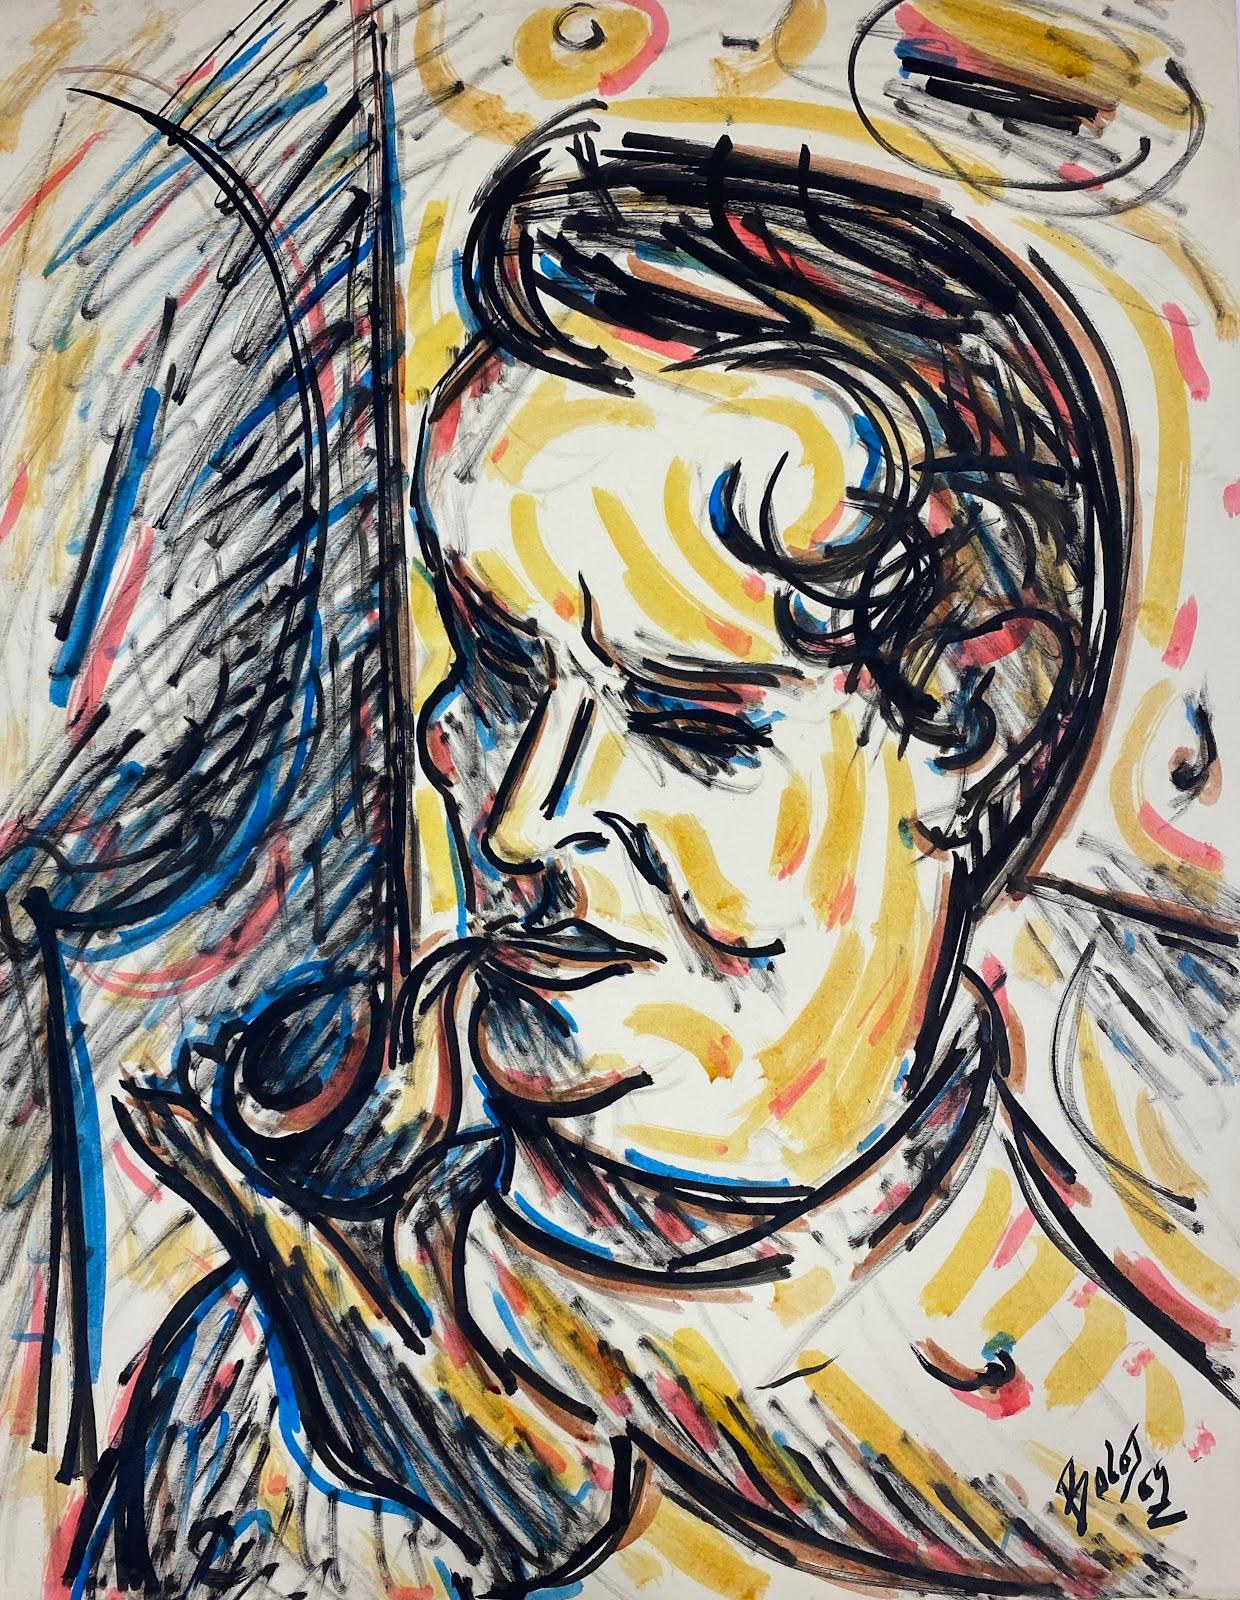 Paul-Louis Bolot (French 1918-2003) Figurative Painting - 20th Century French Modernist Painting Portrait Of Man Smoking His Pipe 